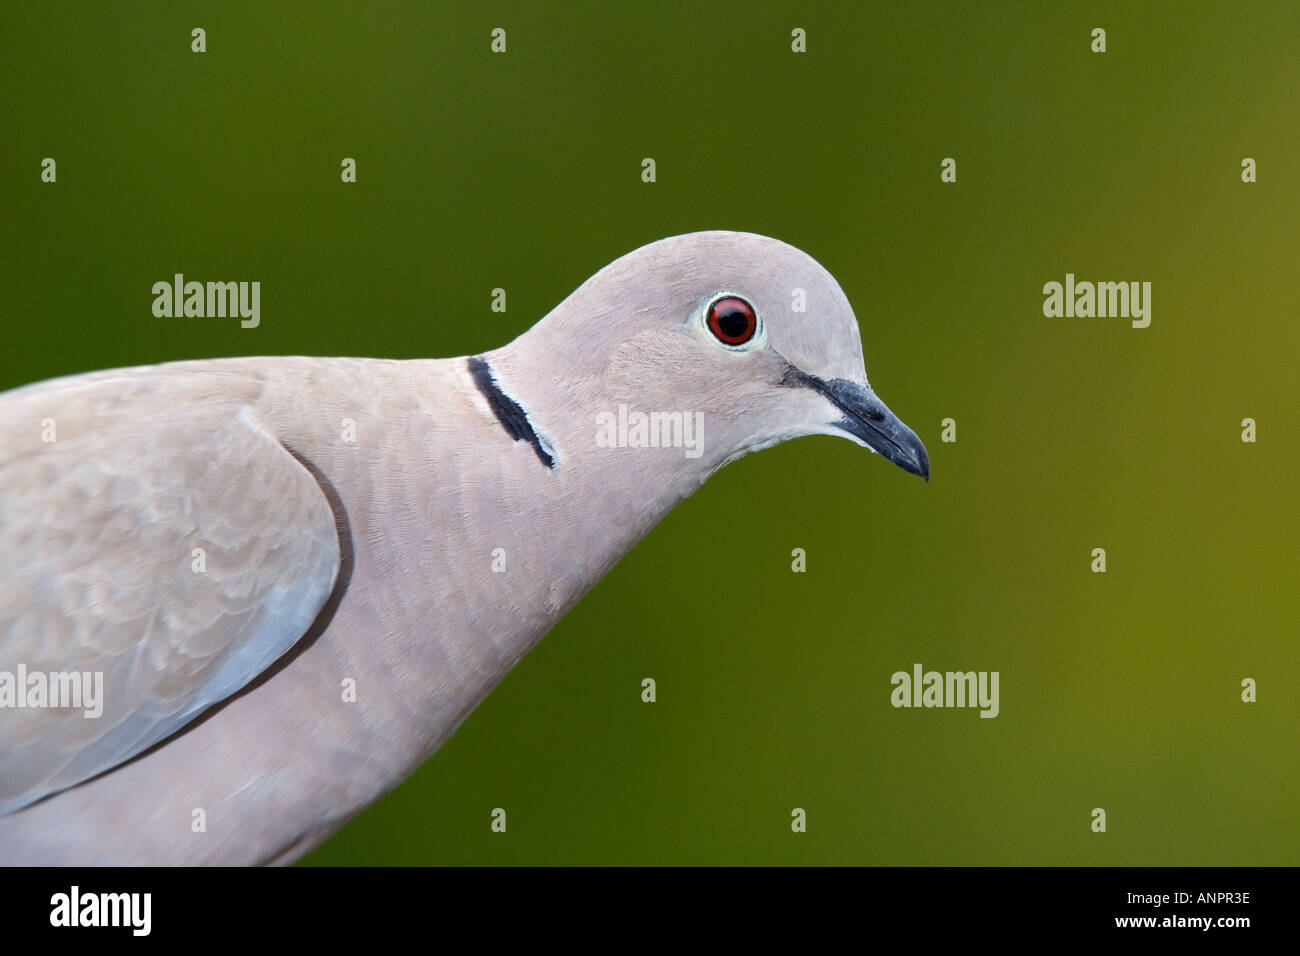 Collared dove Streptopelia decaocto close up of head showing markings and eye with nice defuse background potton bedfordshire Stock Photo